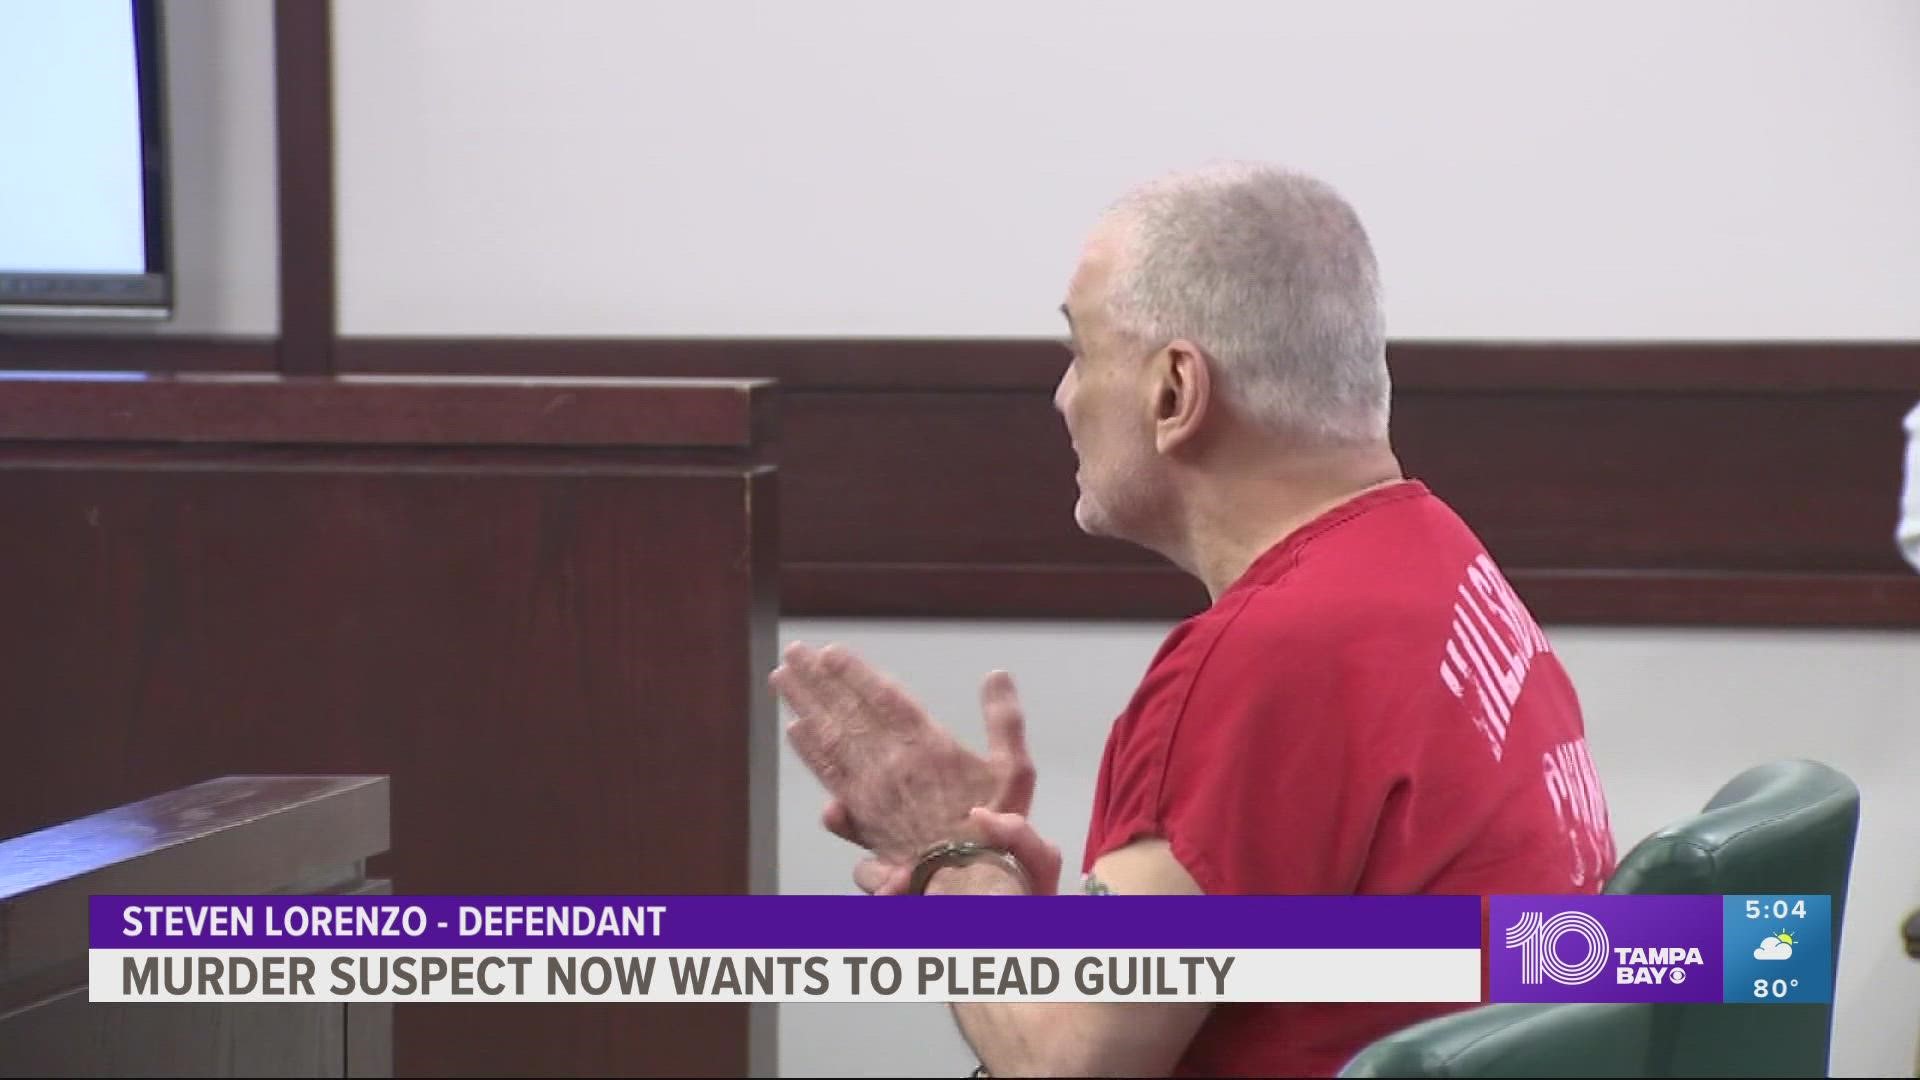 For over 15 years, Steven Lorenzo said he was not guilty of drugging, torturing and killing two men. Now, he says he is guilty and wants the death penalty.